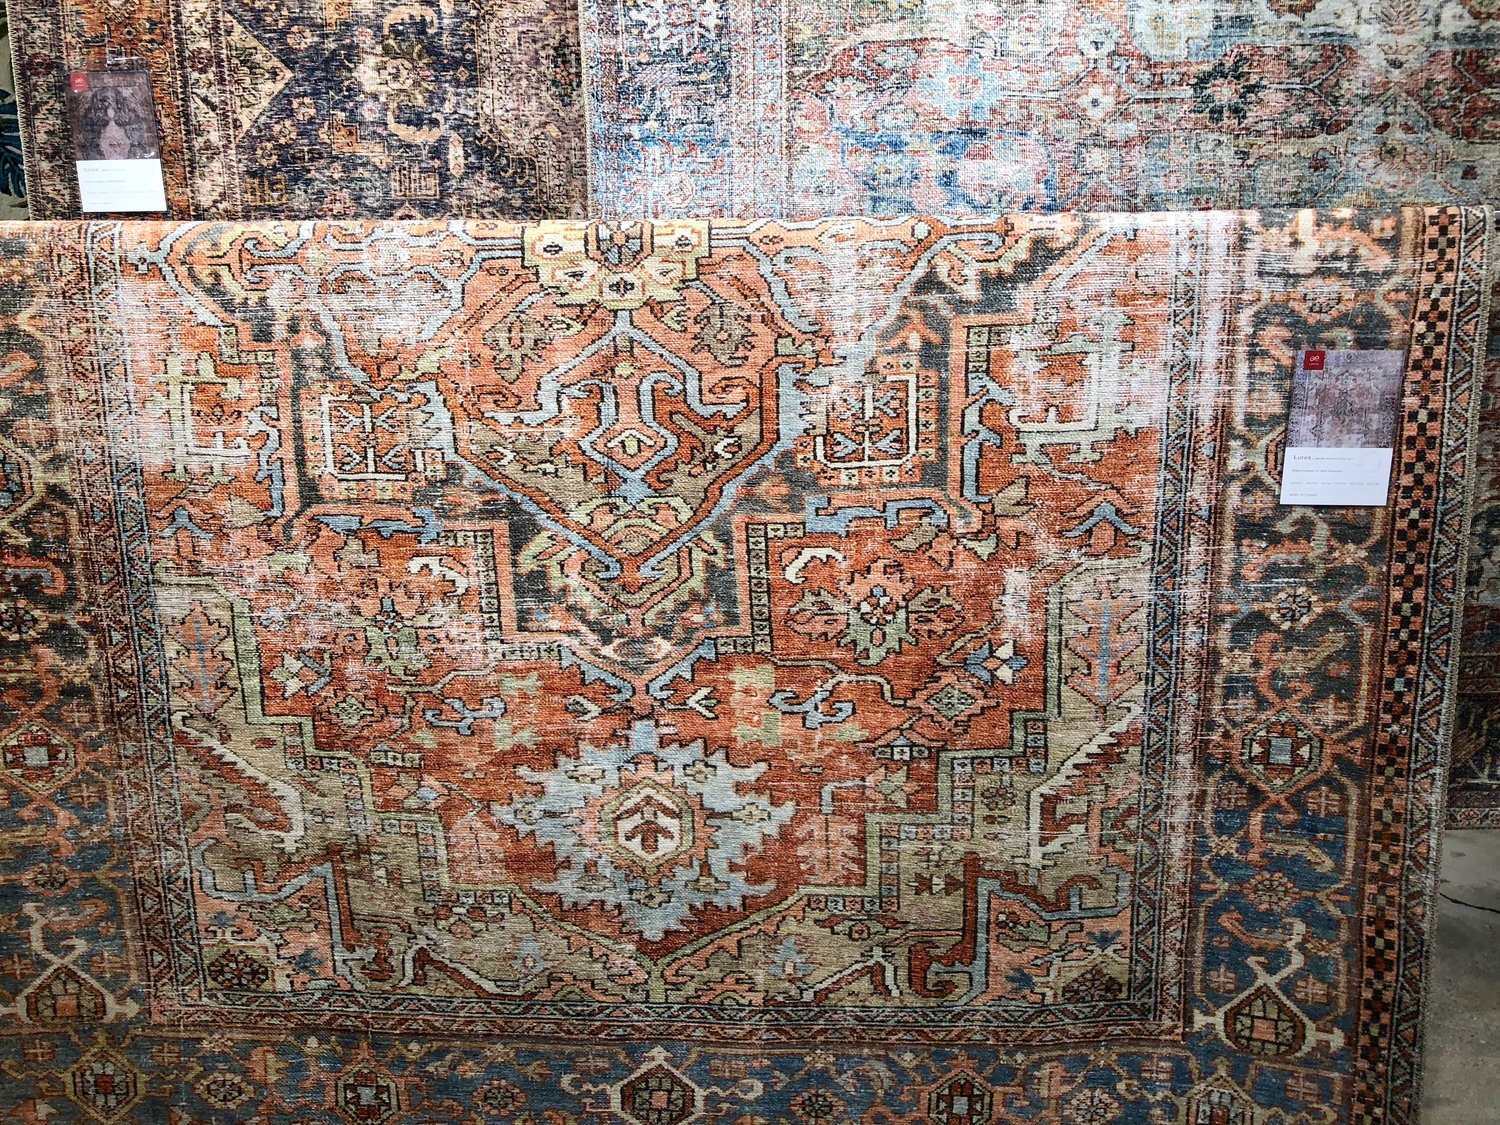 Favorite Things: Rugs from Dallas